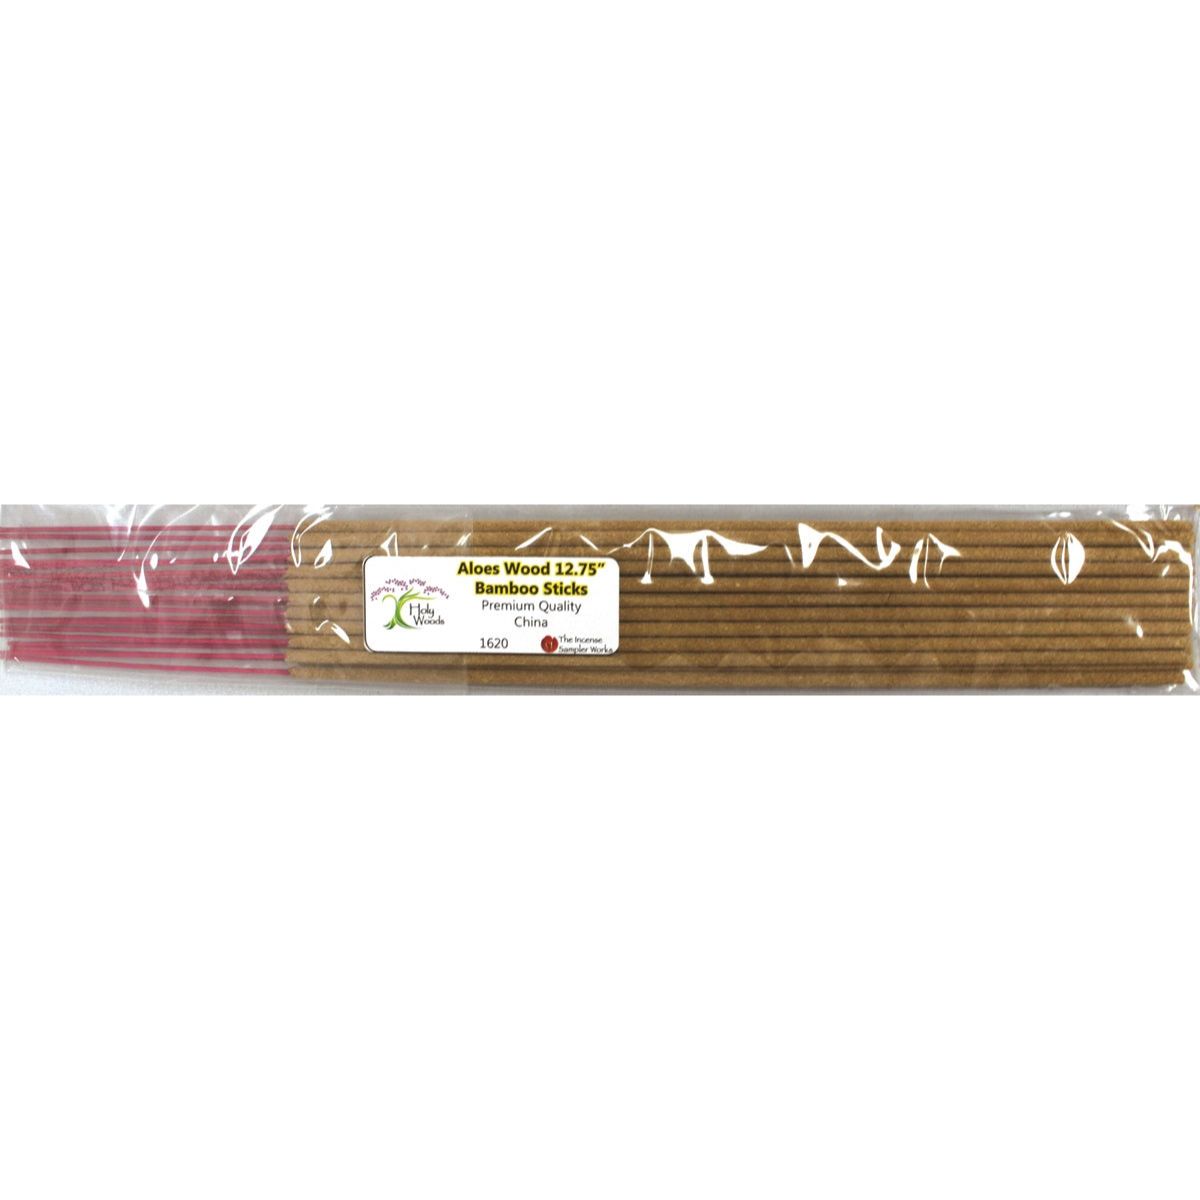 Holy Woods - Aloes Wood Bamboo Core, 12.75" 20 Sticks